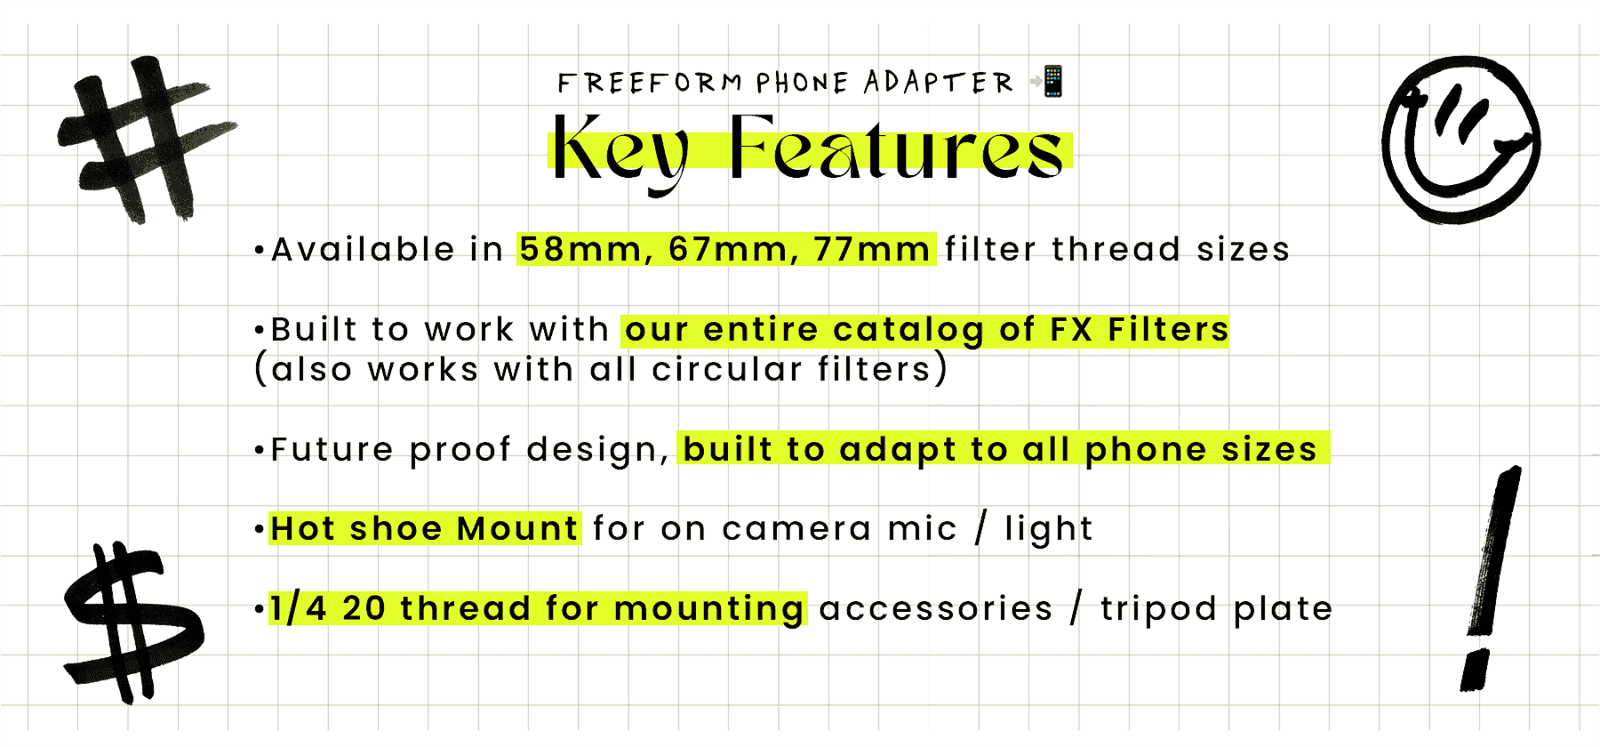 These are some of the key features of our Freeform Phone Adapter